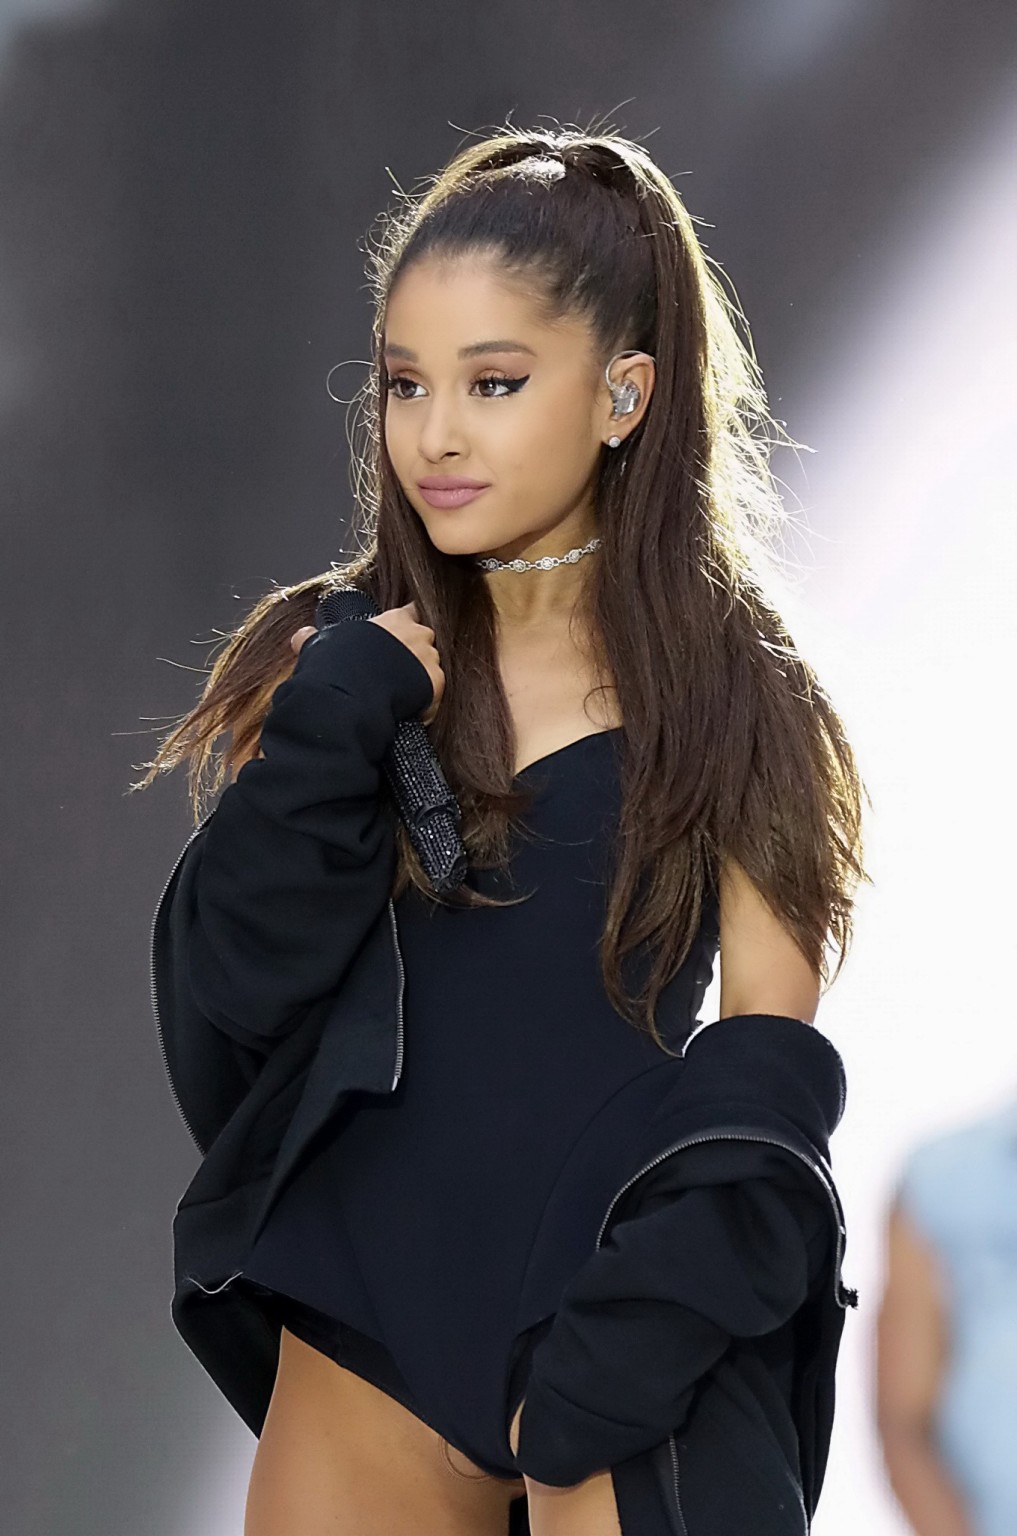 Ariana Black Porn - Ariana Grande shows off her shaved pussy in a tiny black outfit while  performing Porn Pictures, XXX Photos, Sex Images #3230293 - PICTOA